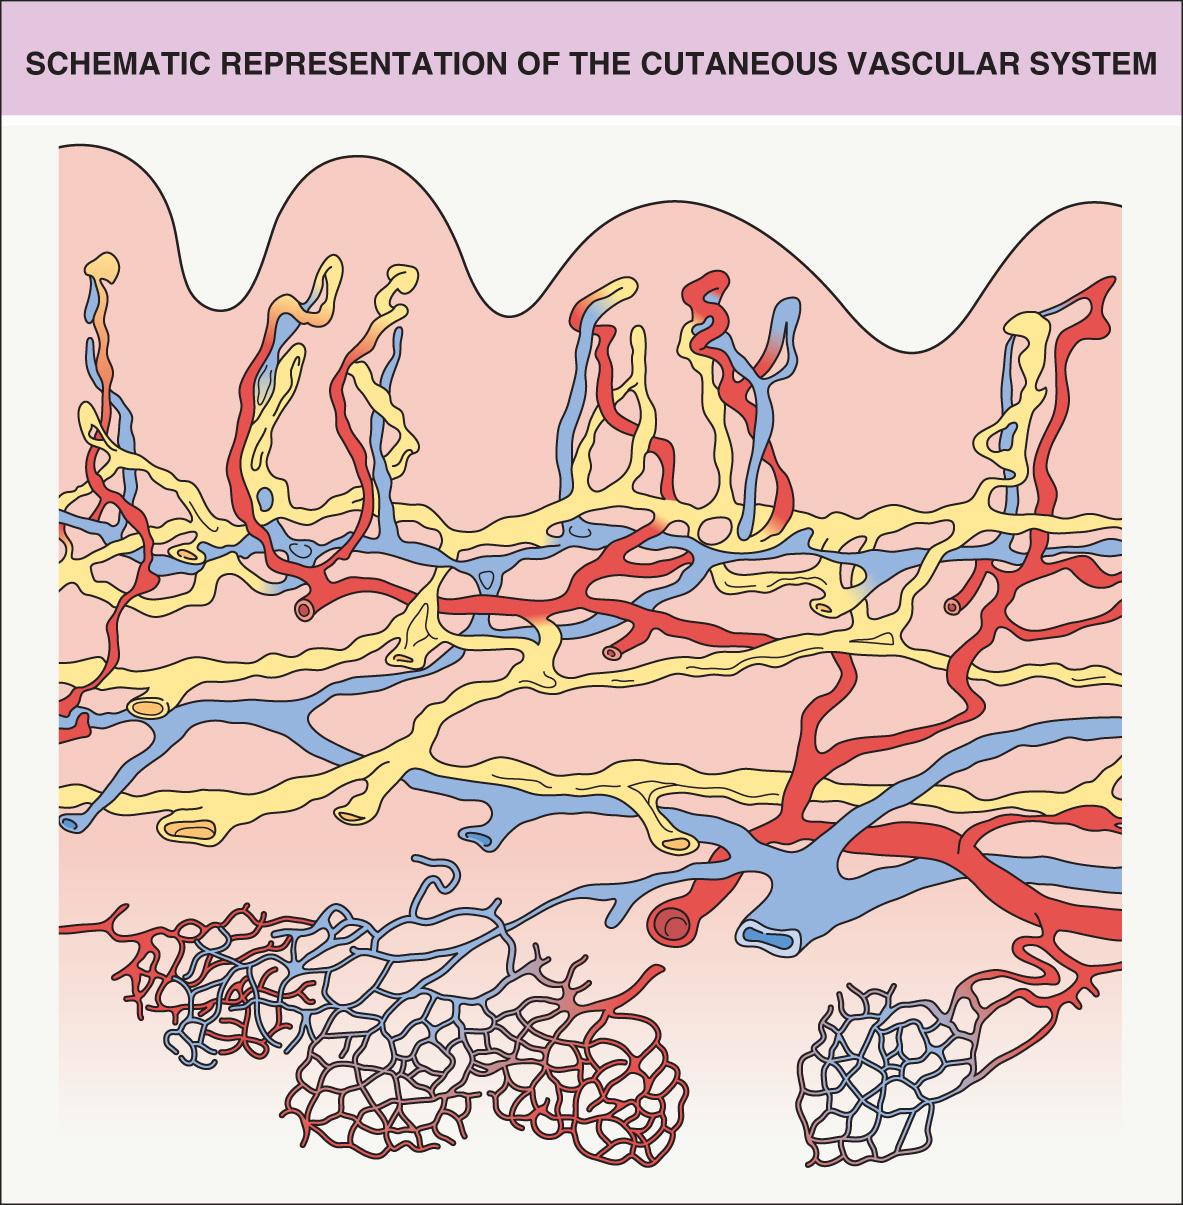 Fig. 102.1, Schematic representation of the cutaneous vascular system.